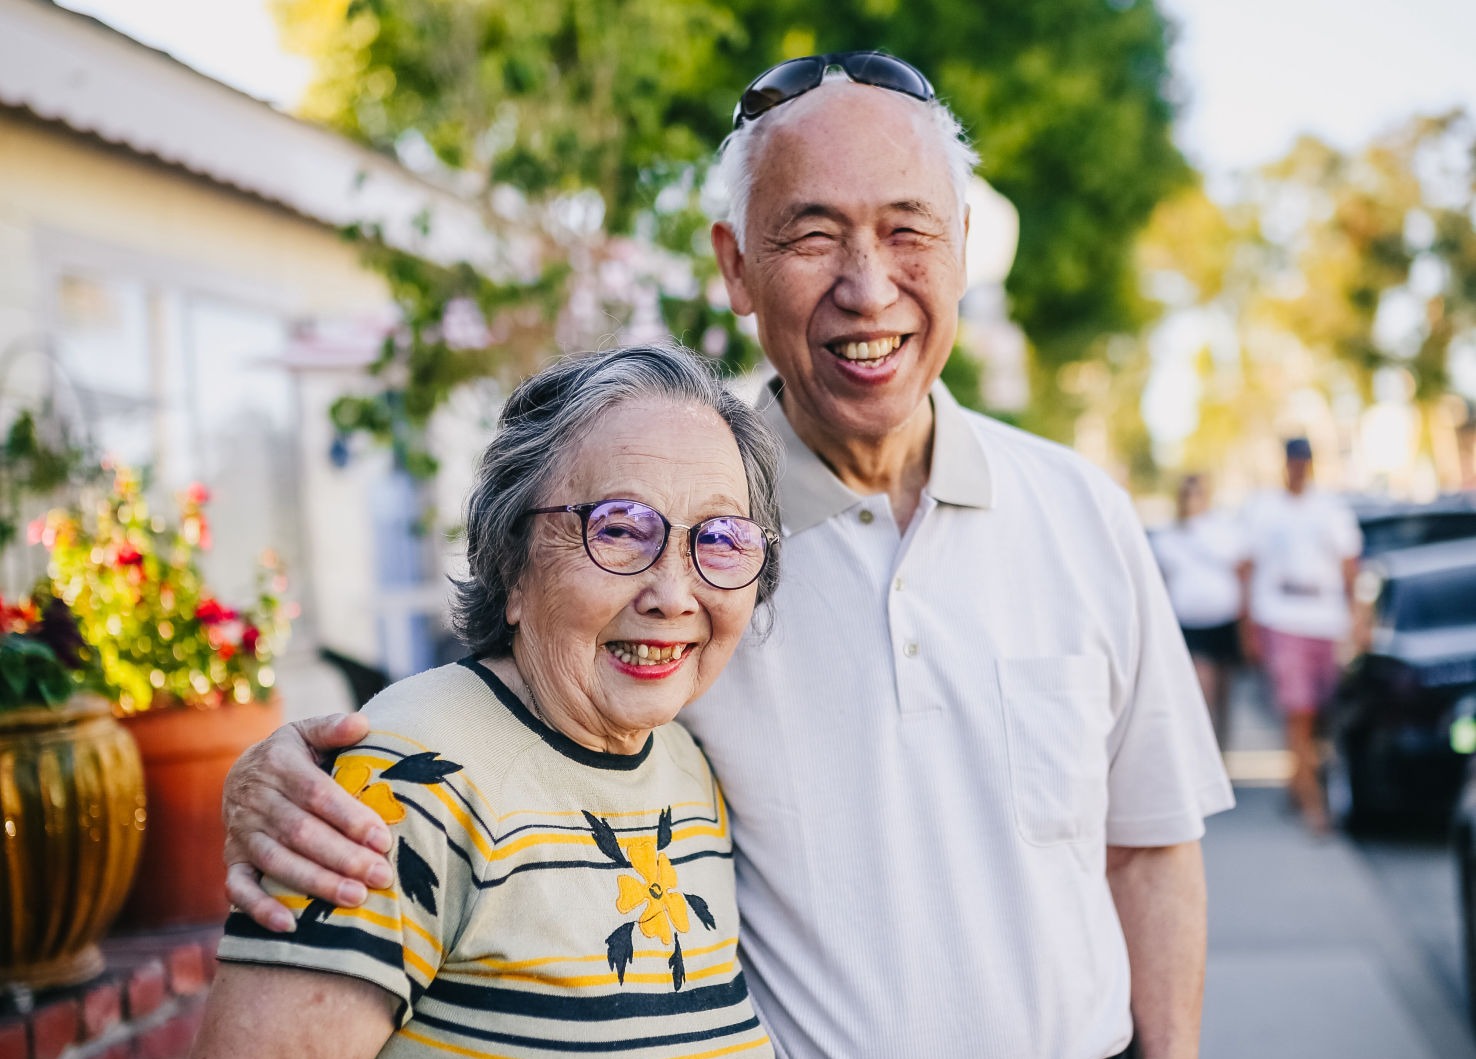 A man and woman smile at the camera. He has his arm around her shoulder. They are standing on a sidewalk, out of focus in the background, on a sunny day